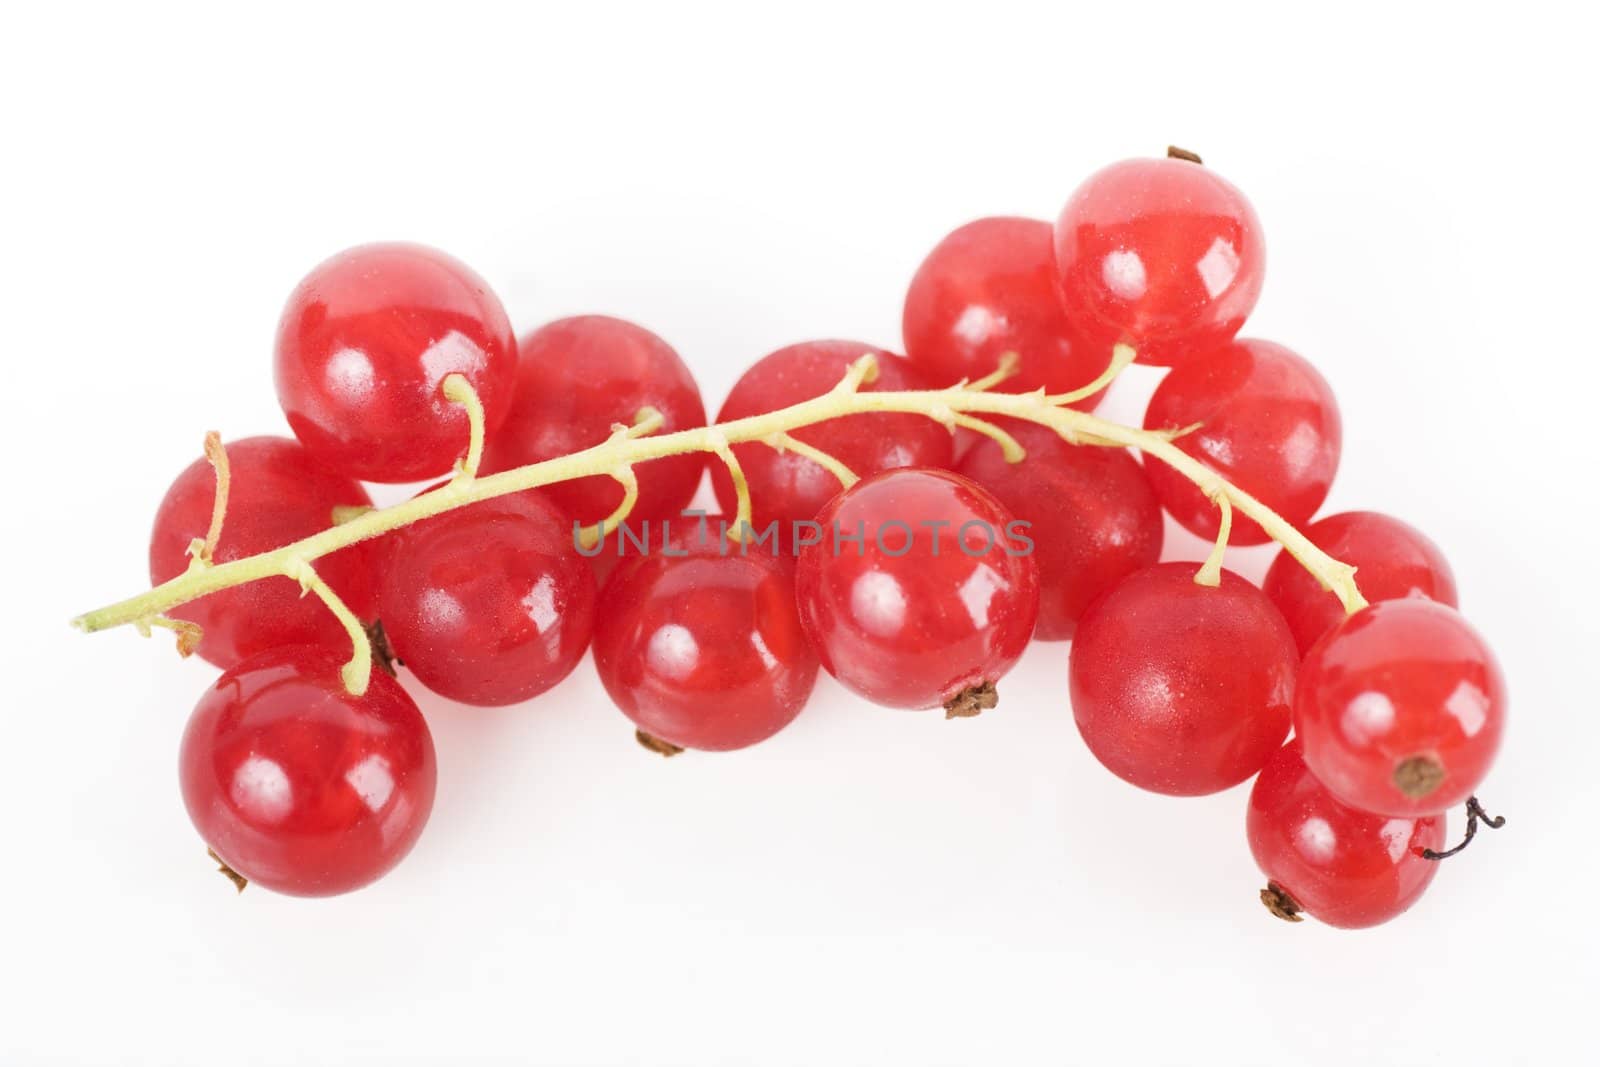 Red Currants Isolated on White by charlotteLake